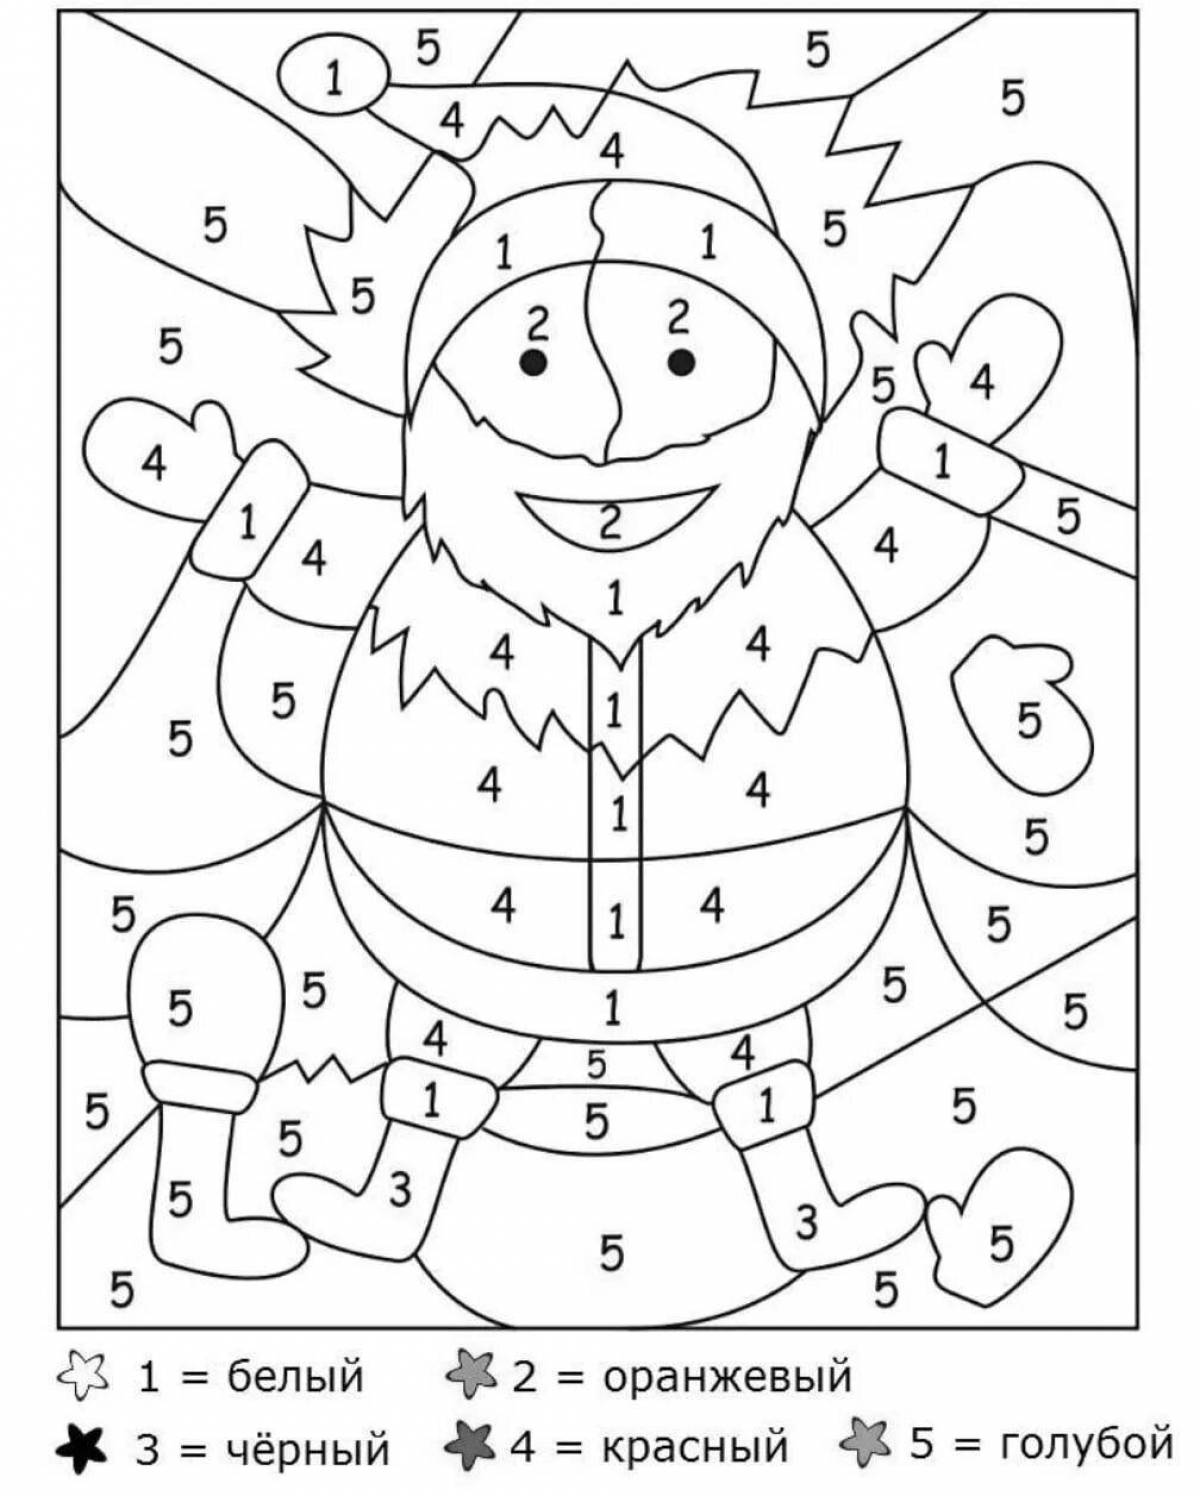 Glowing snowman coloring book